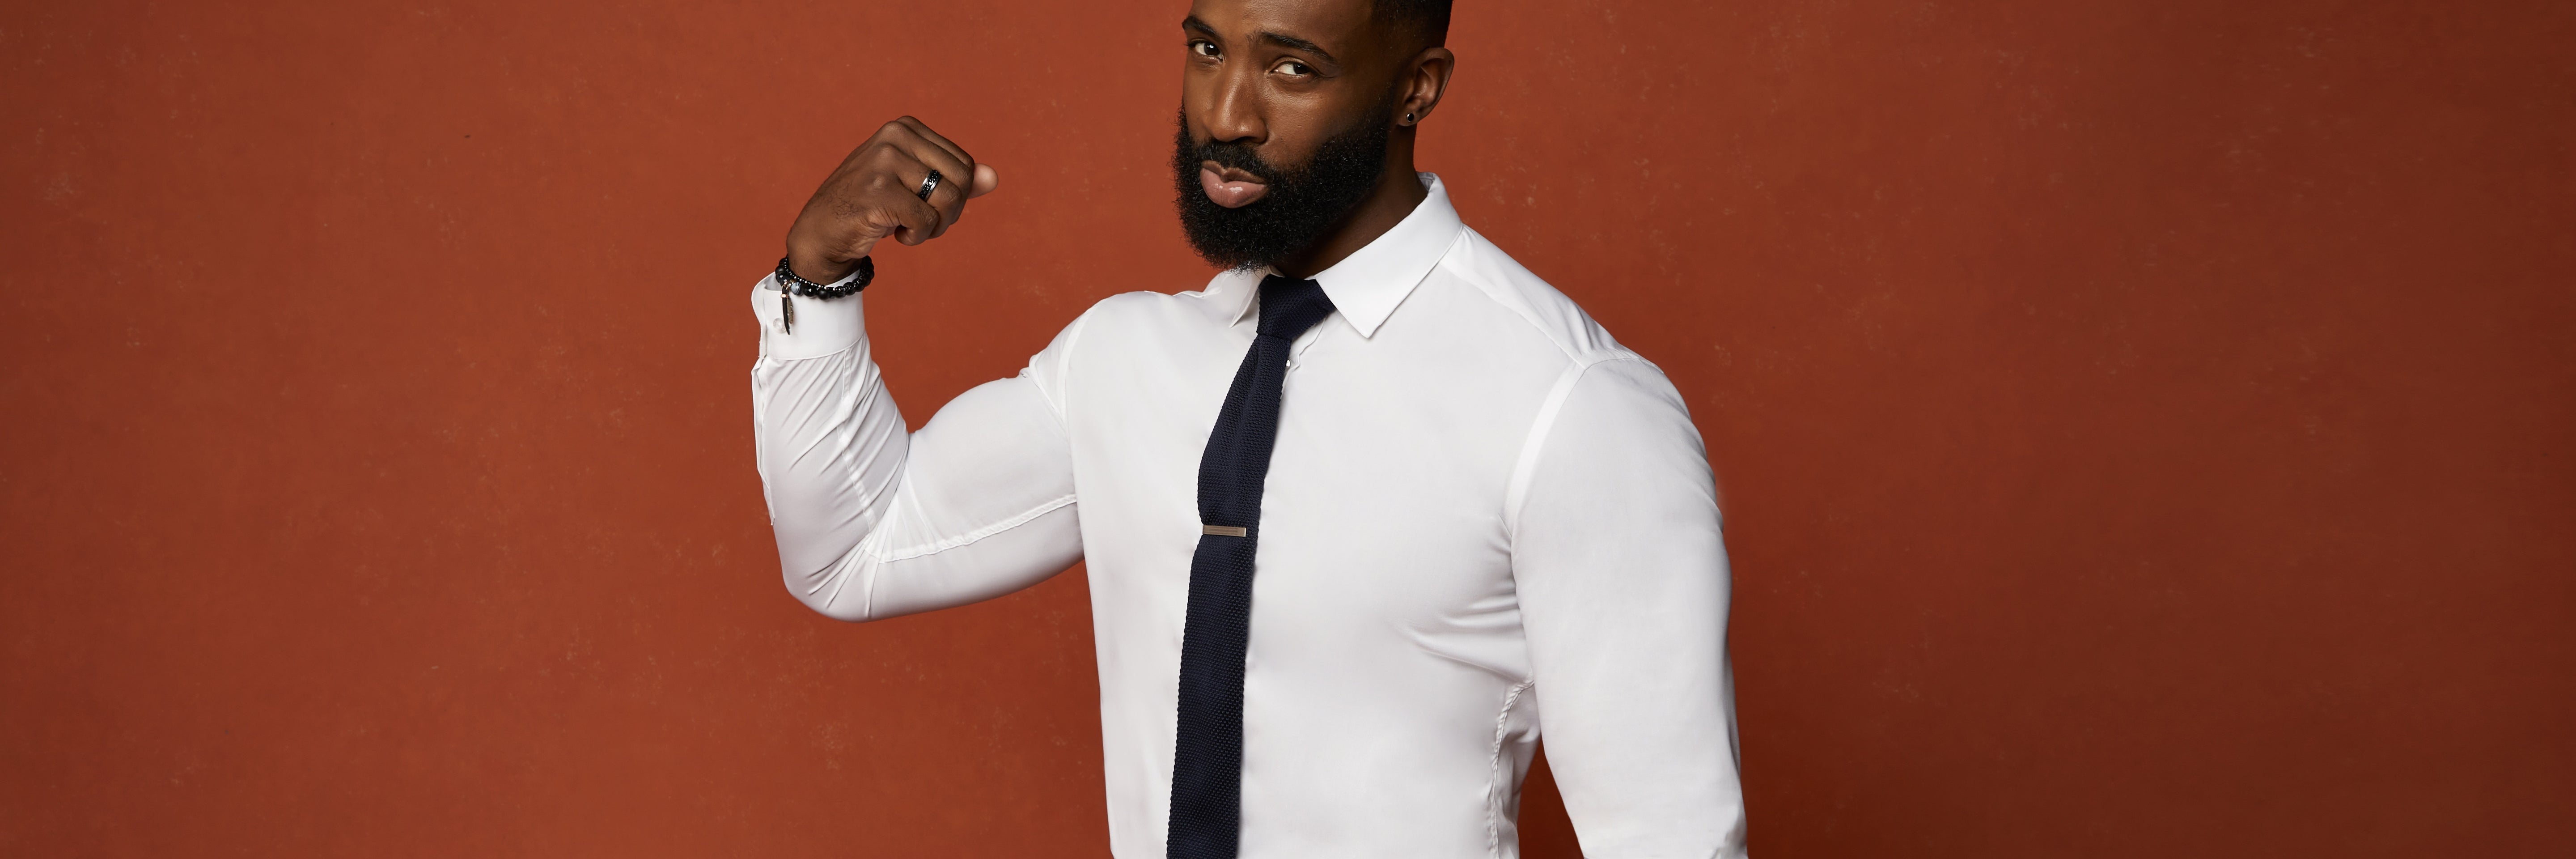 Stretchy Shirts - Everything You Need to Know